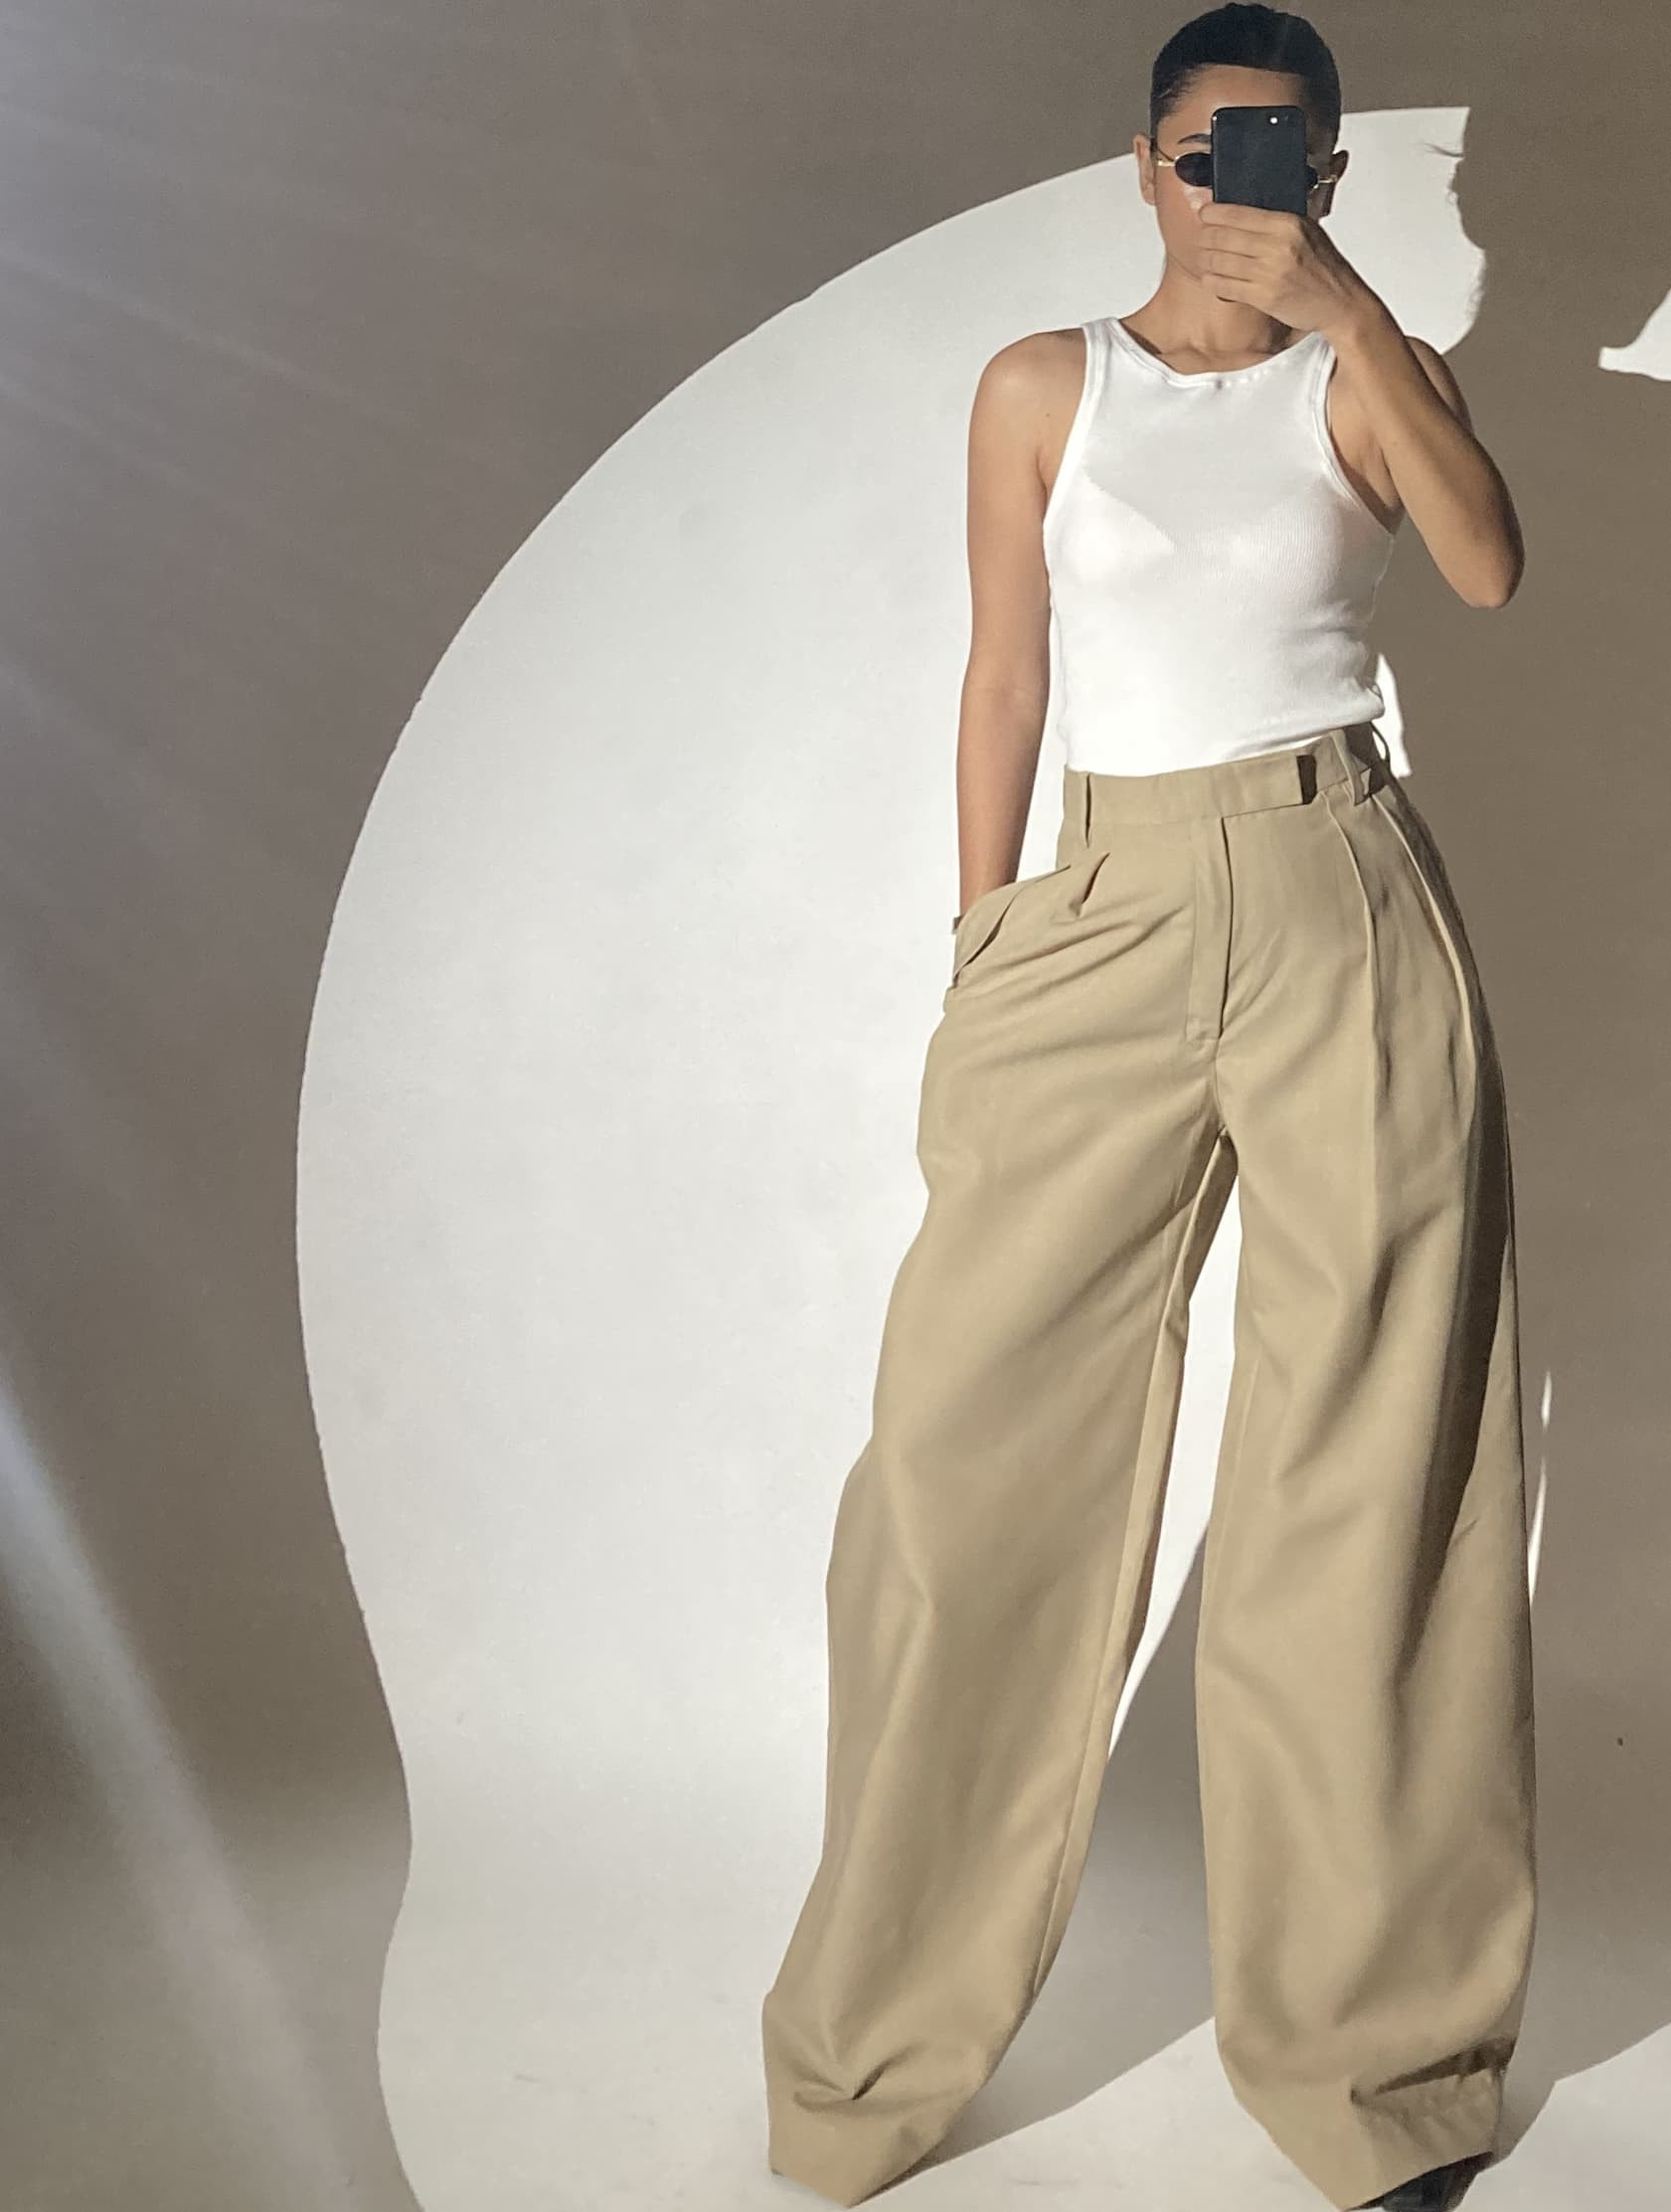 Sand Oversized Trousers, Valtta, Rs 2199